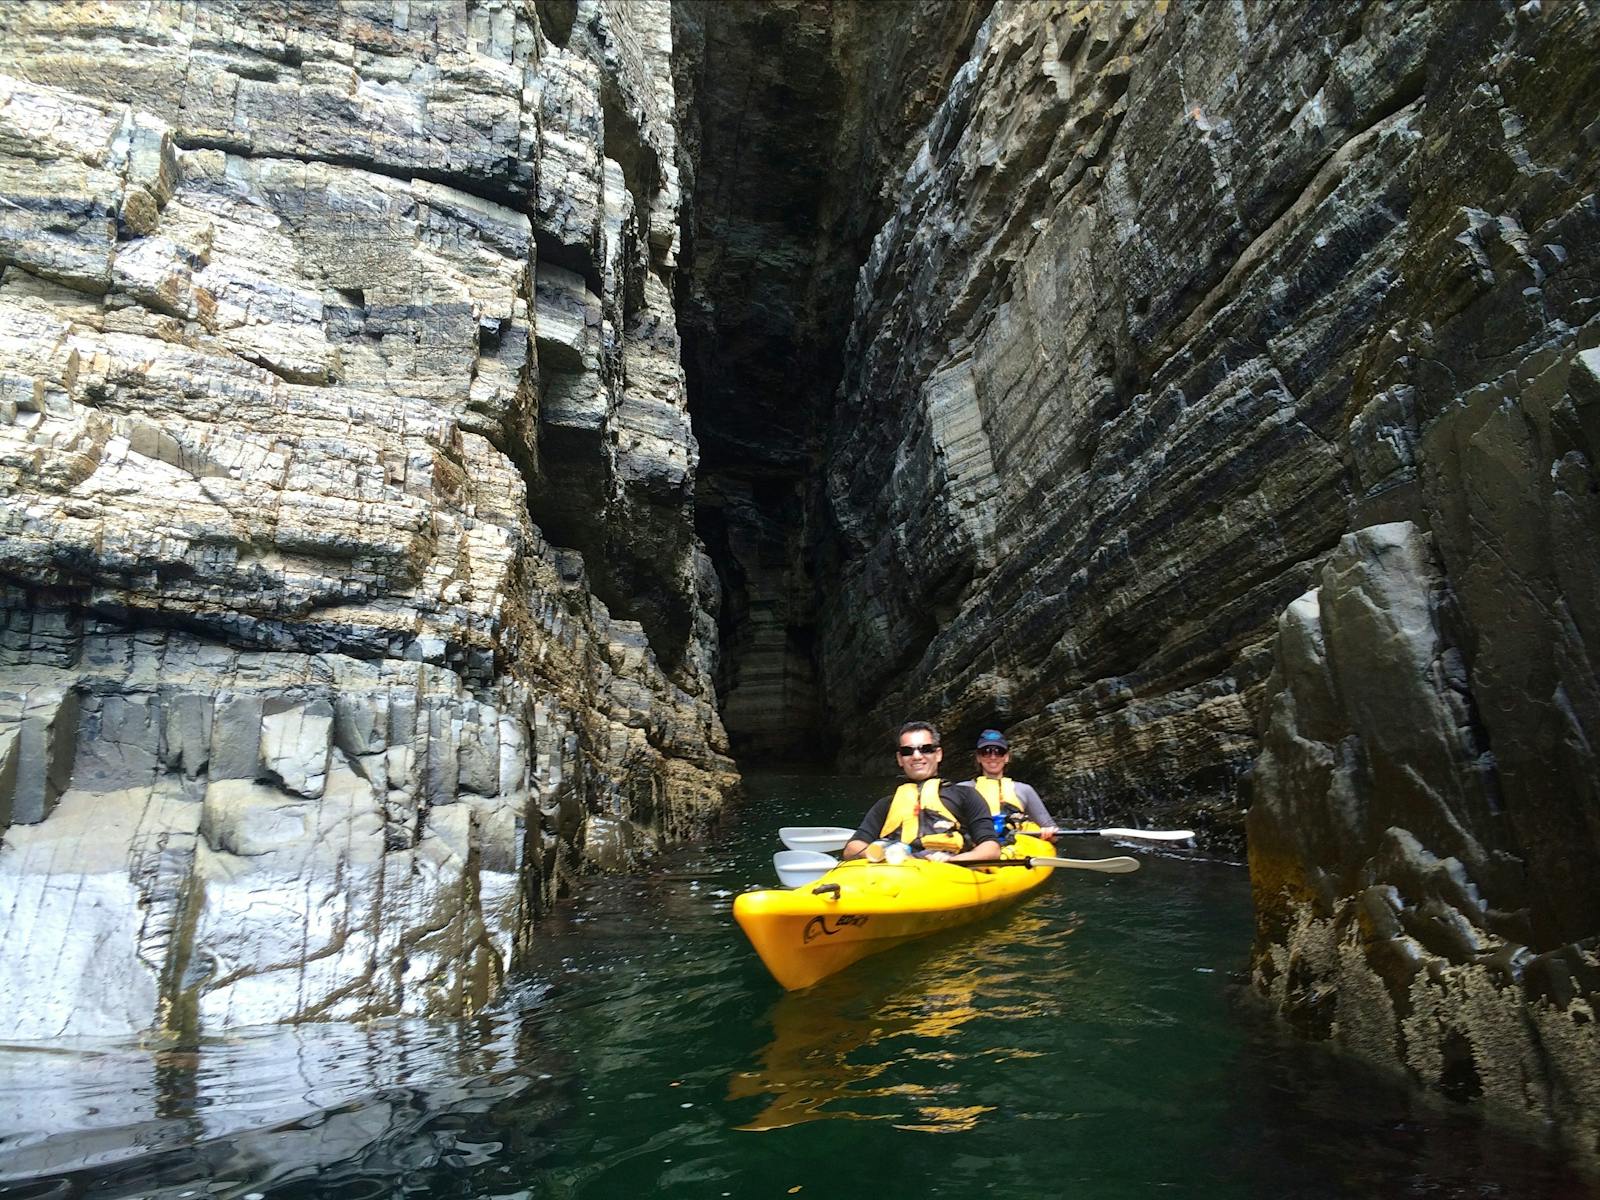 Kayakers in a cave, Derwent River, Hobart